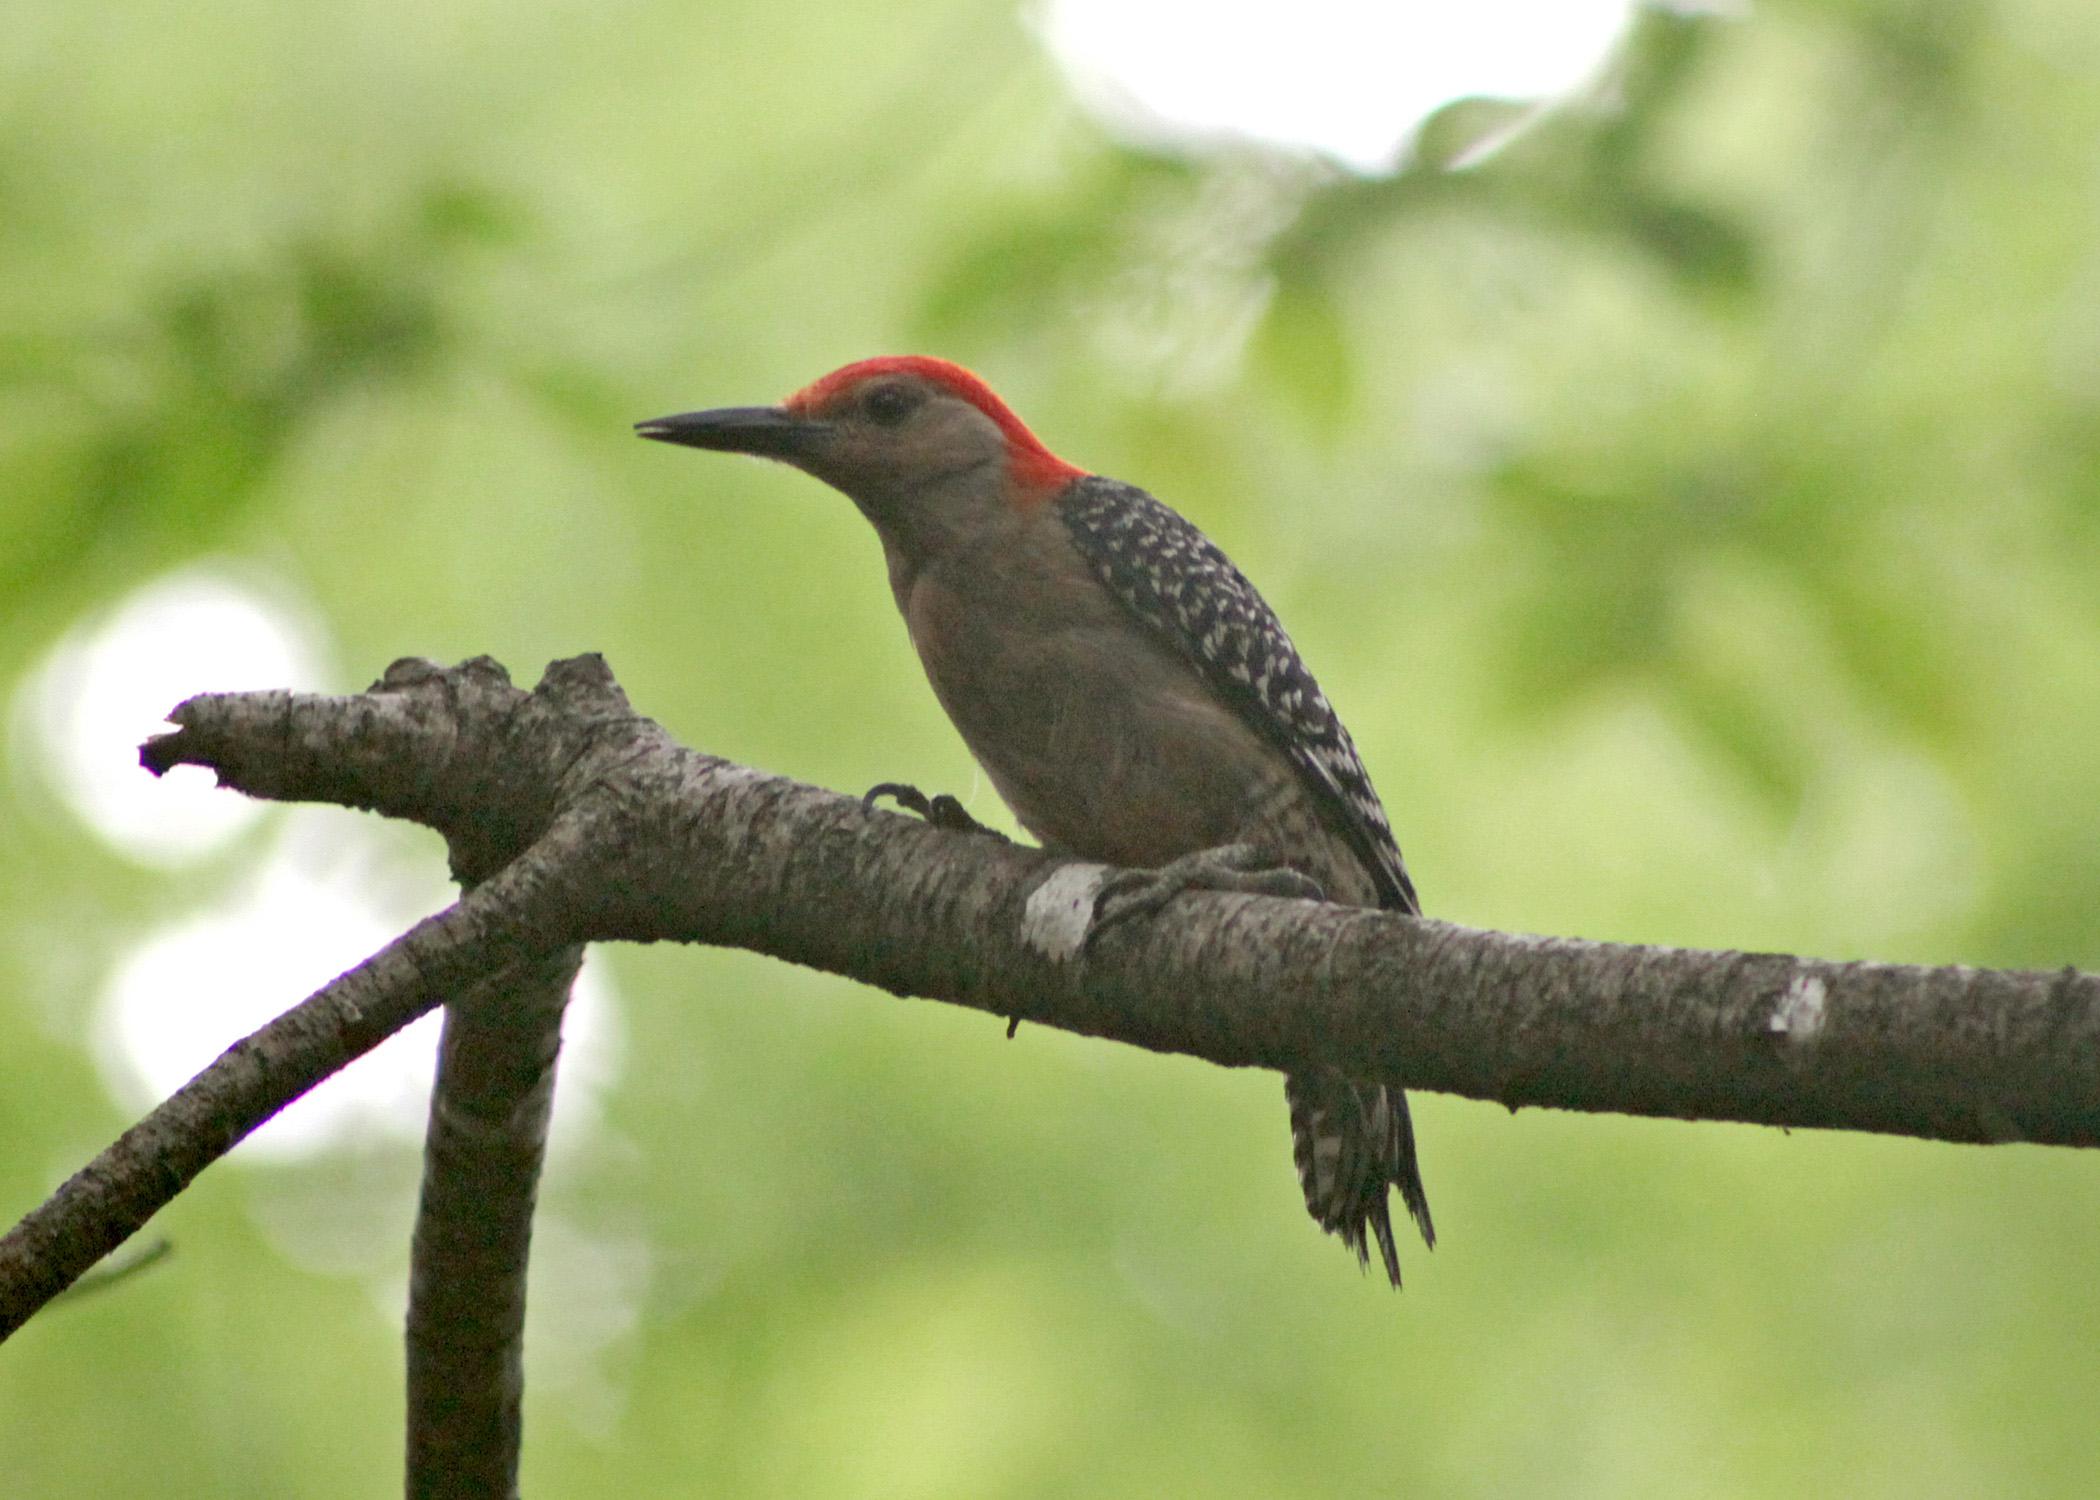 A red-bellied woodpecker may help unlock secrets to improve football helmet design. (Photo by MSU Ag Communications/Kat Lawrence)